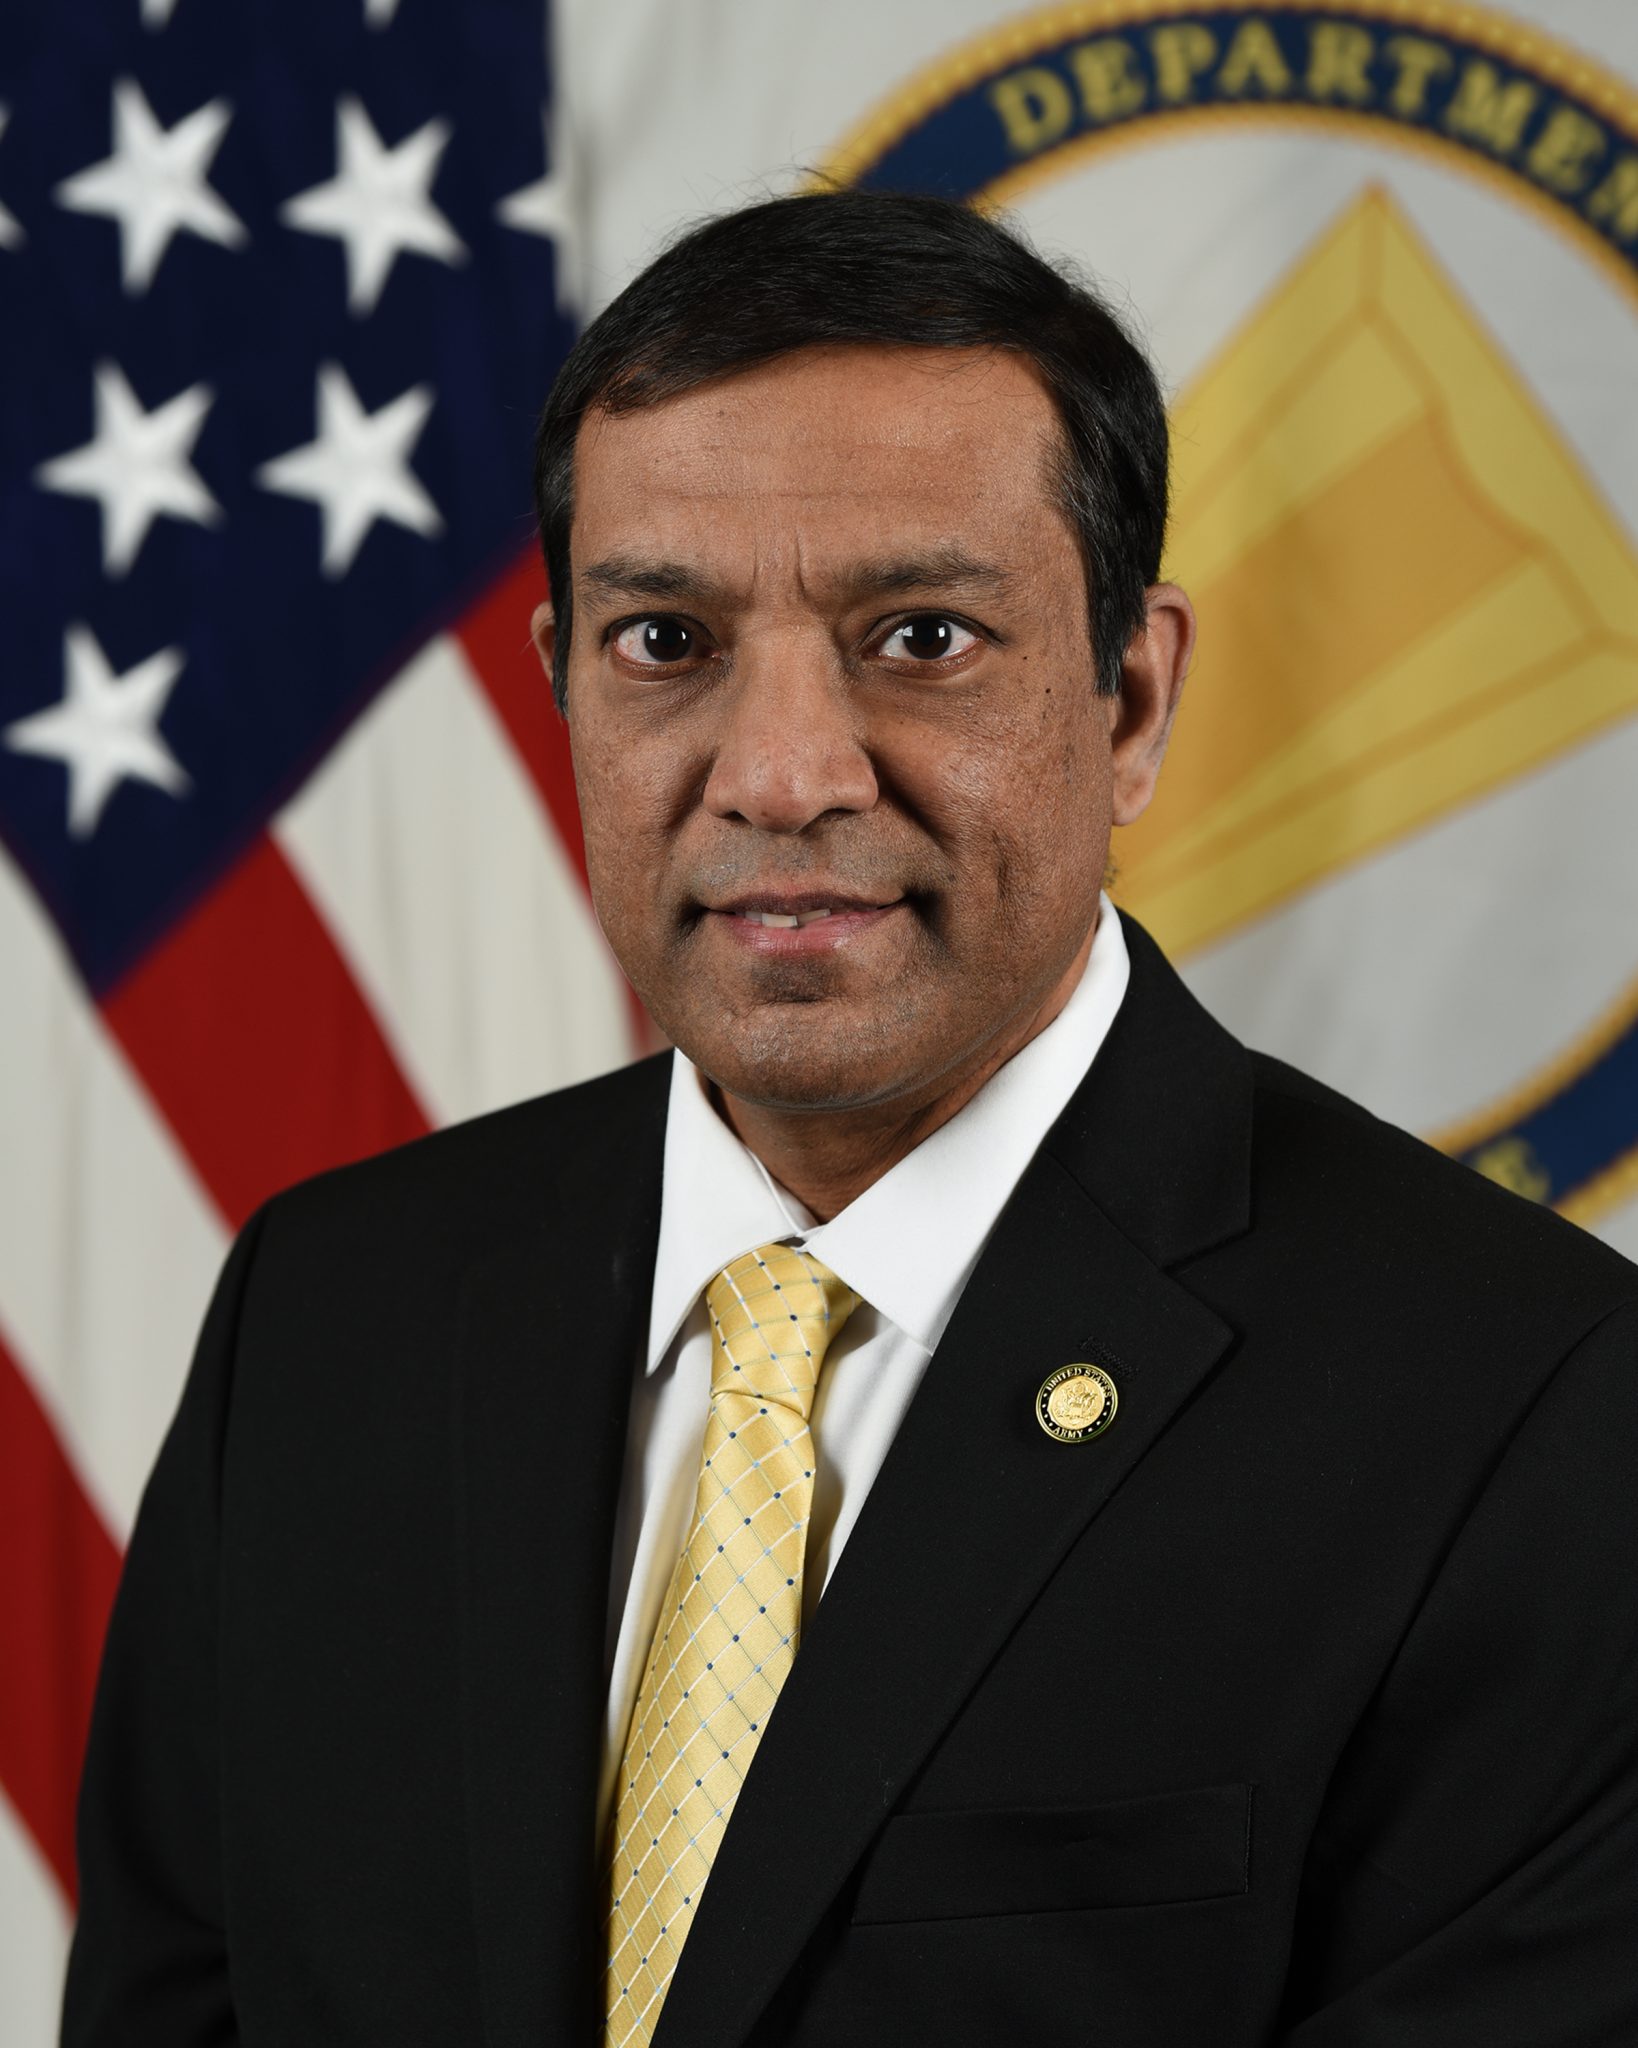 Dr. Raj Iyer. Chief Information Officer, poses for his  official portrait in the Army portrait stuidio in Arlington, Virginia, Jan 22,2021. (U.S. Army photo by Spc. XaViera Masline)